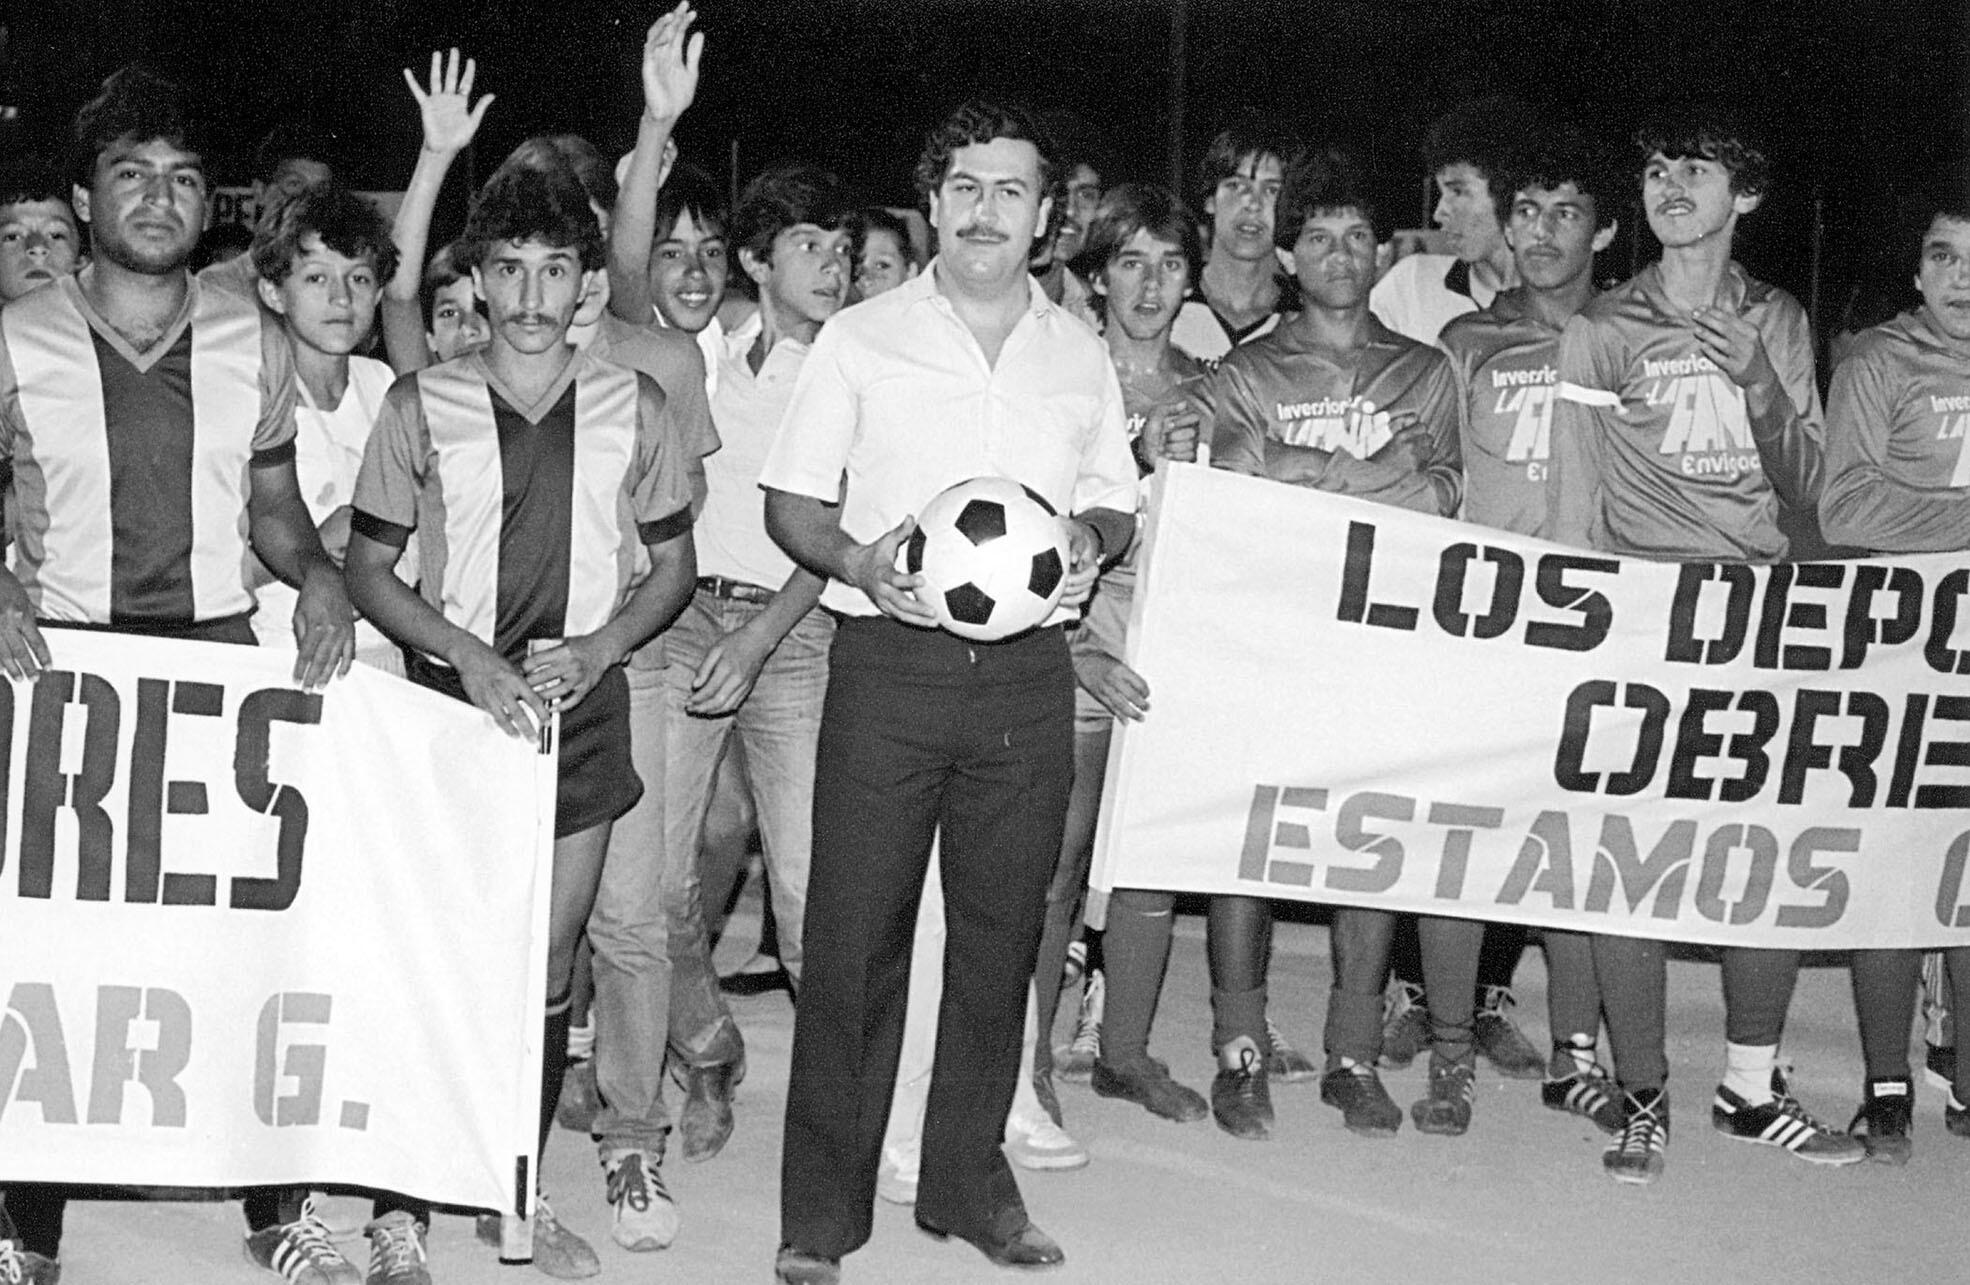 Pablo Escobar, shown holding a ball, was both a drug kingpin and a supporter of under-resourced local soccer teams. (Photo courtesy of All Rise Films.)